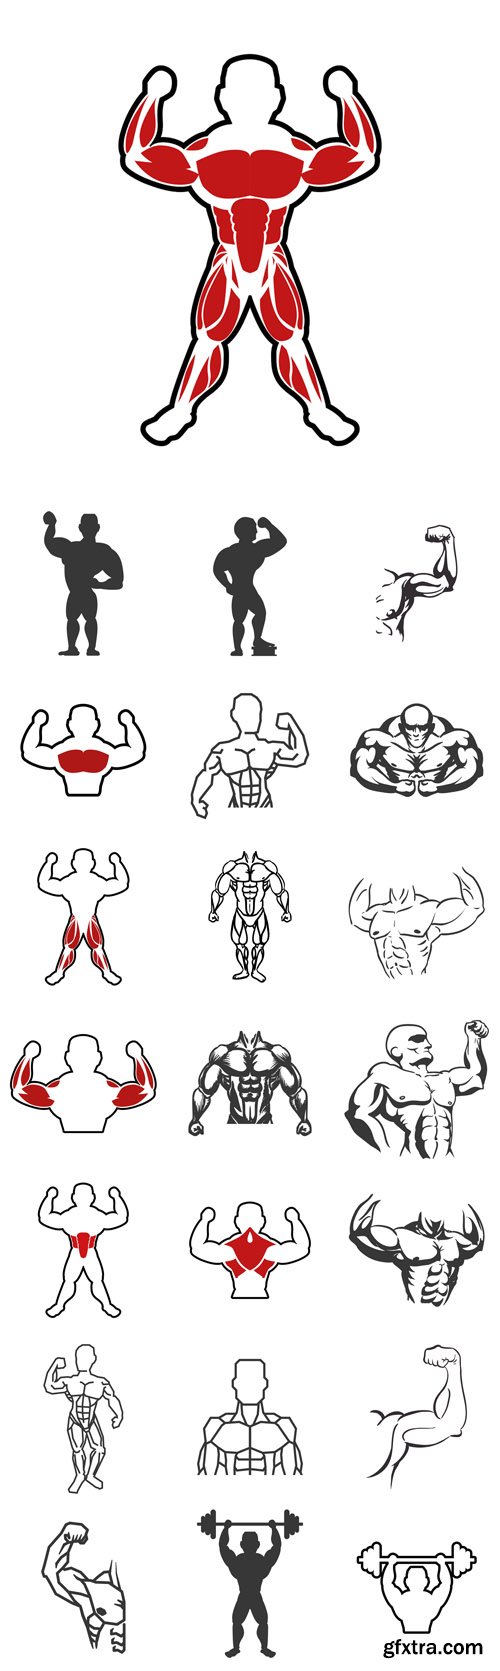 Vector Set - Healthy lifestyle and bodybuilder concept represented by Muscle man icon